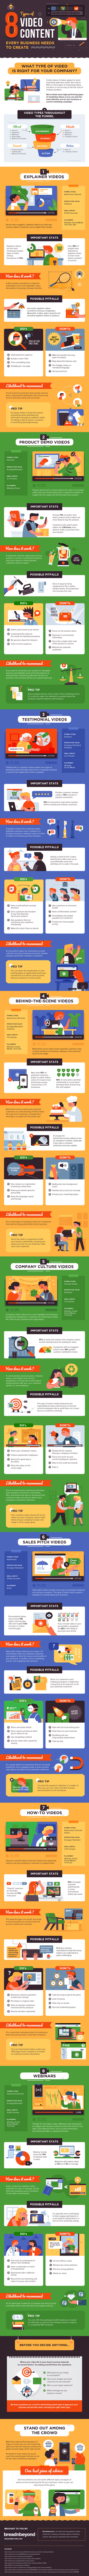 8 Types of Video Content Every Business Needs to Create [INFOGRAPHIC]